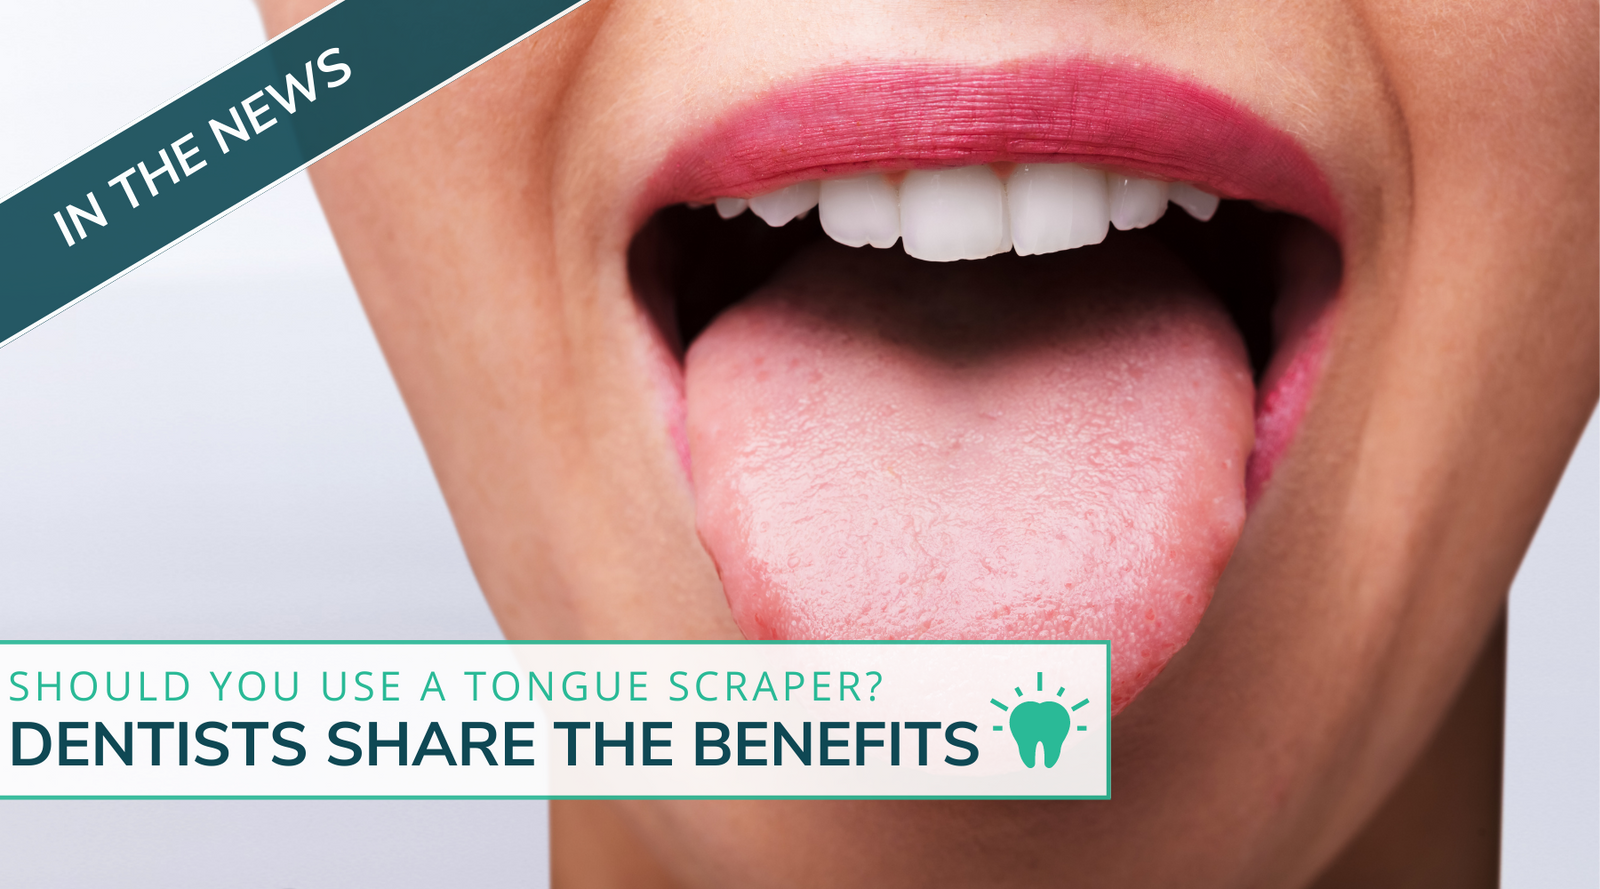 Should You Use A Tongue Scraper? Dentists Share The Benefits